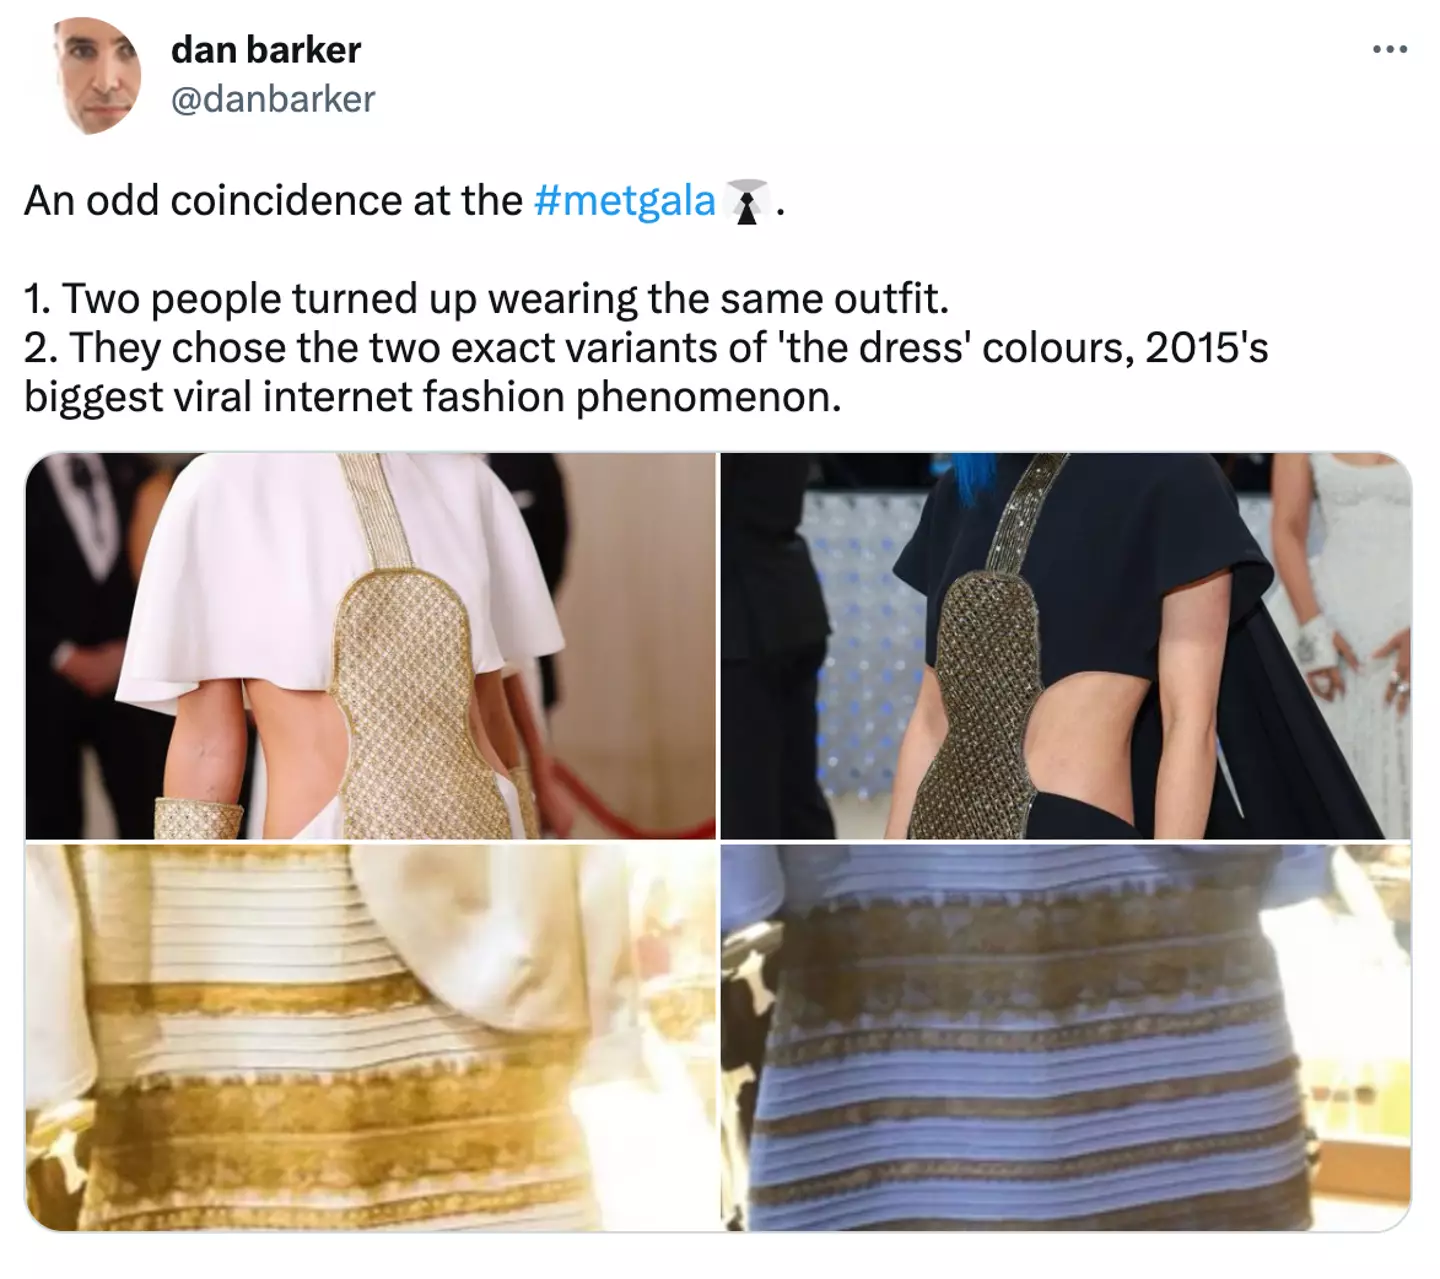 Social media fans have likened the fashion faux pas to a viral meme.